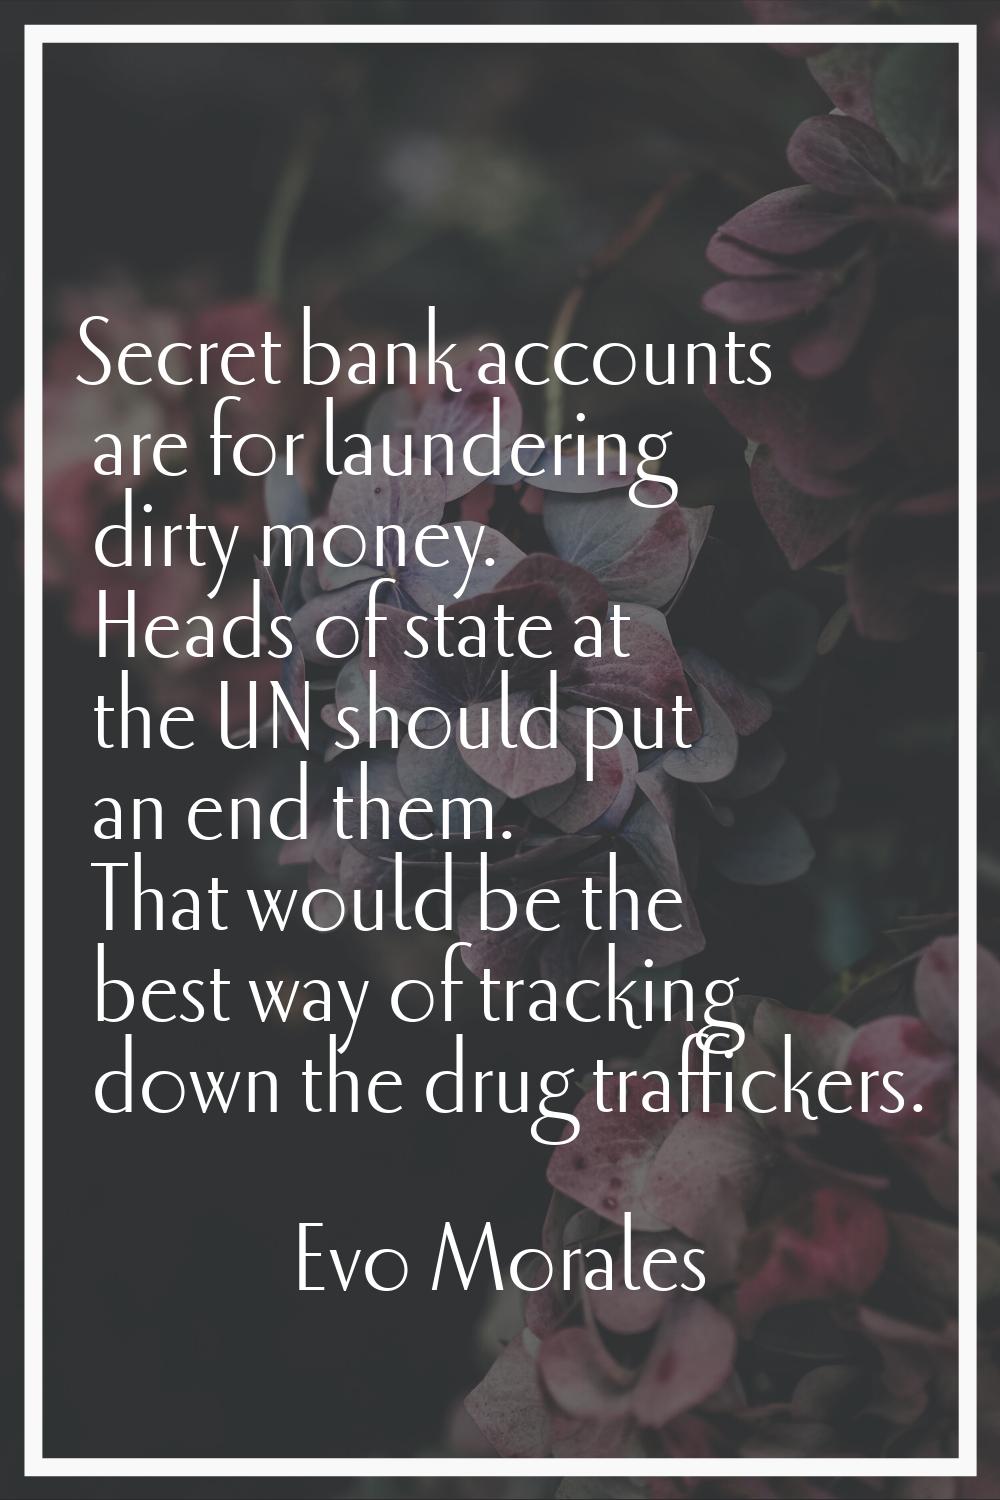 Secret bank accounts are for laundering dirty money. Heads of state at the UN should put an end the